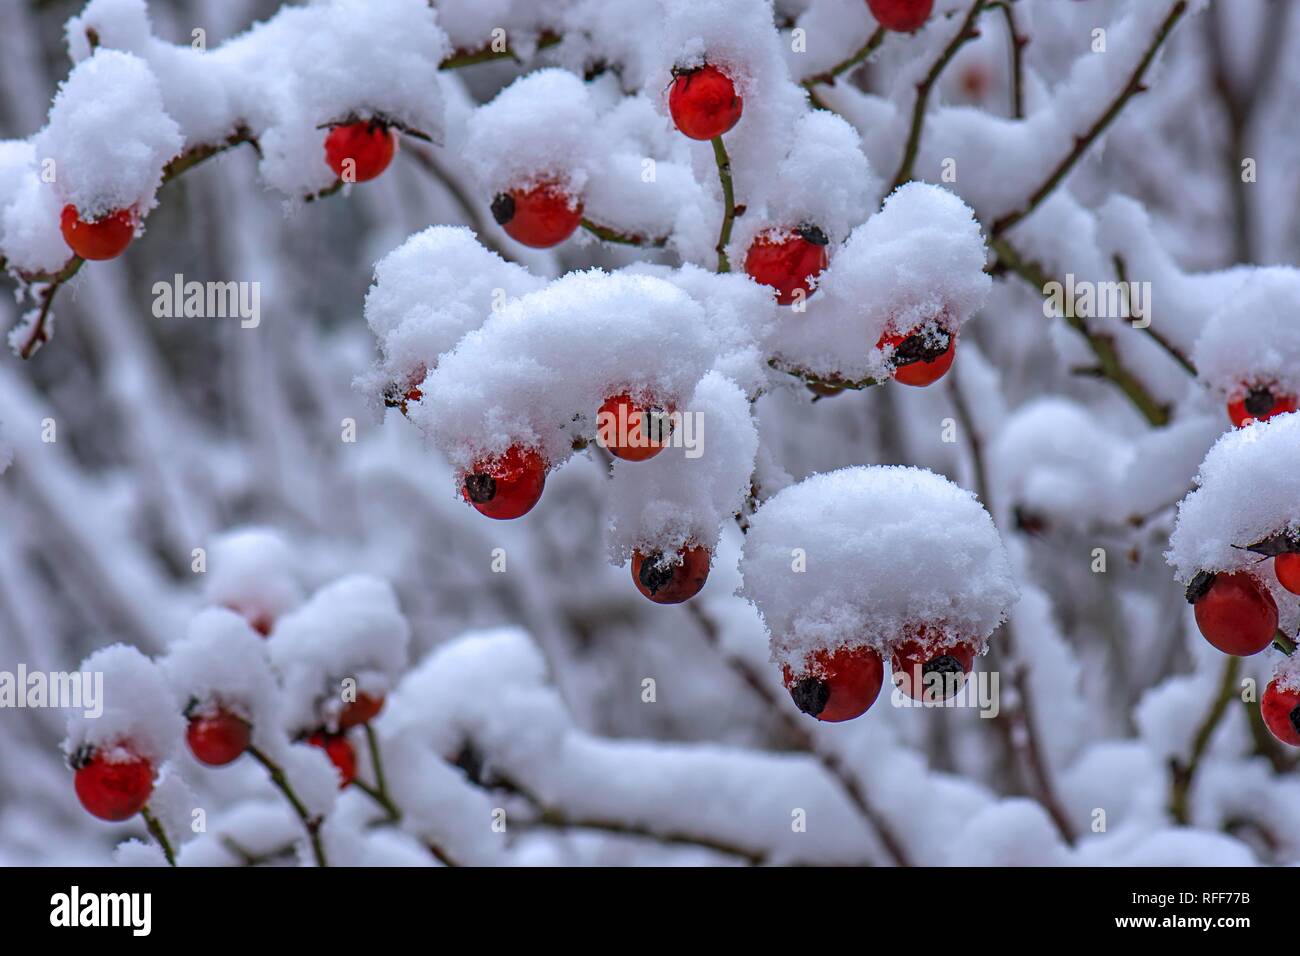 Snowy rose bush with red rose hips in winter, Bavaria, Germany Stock Photo